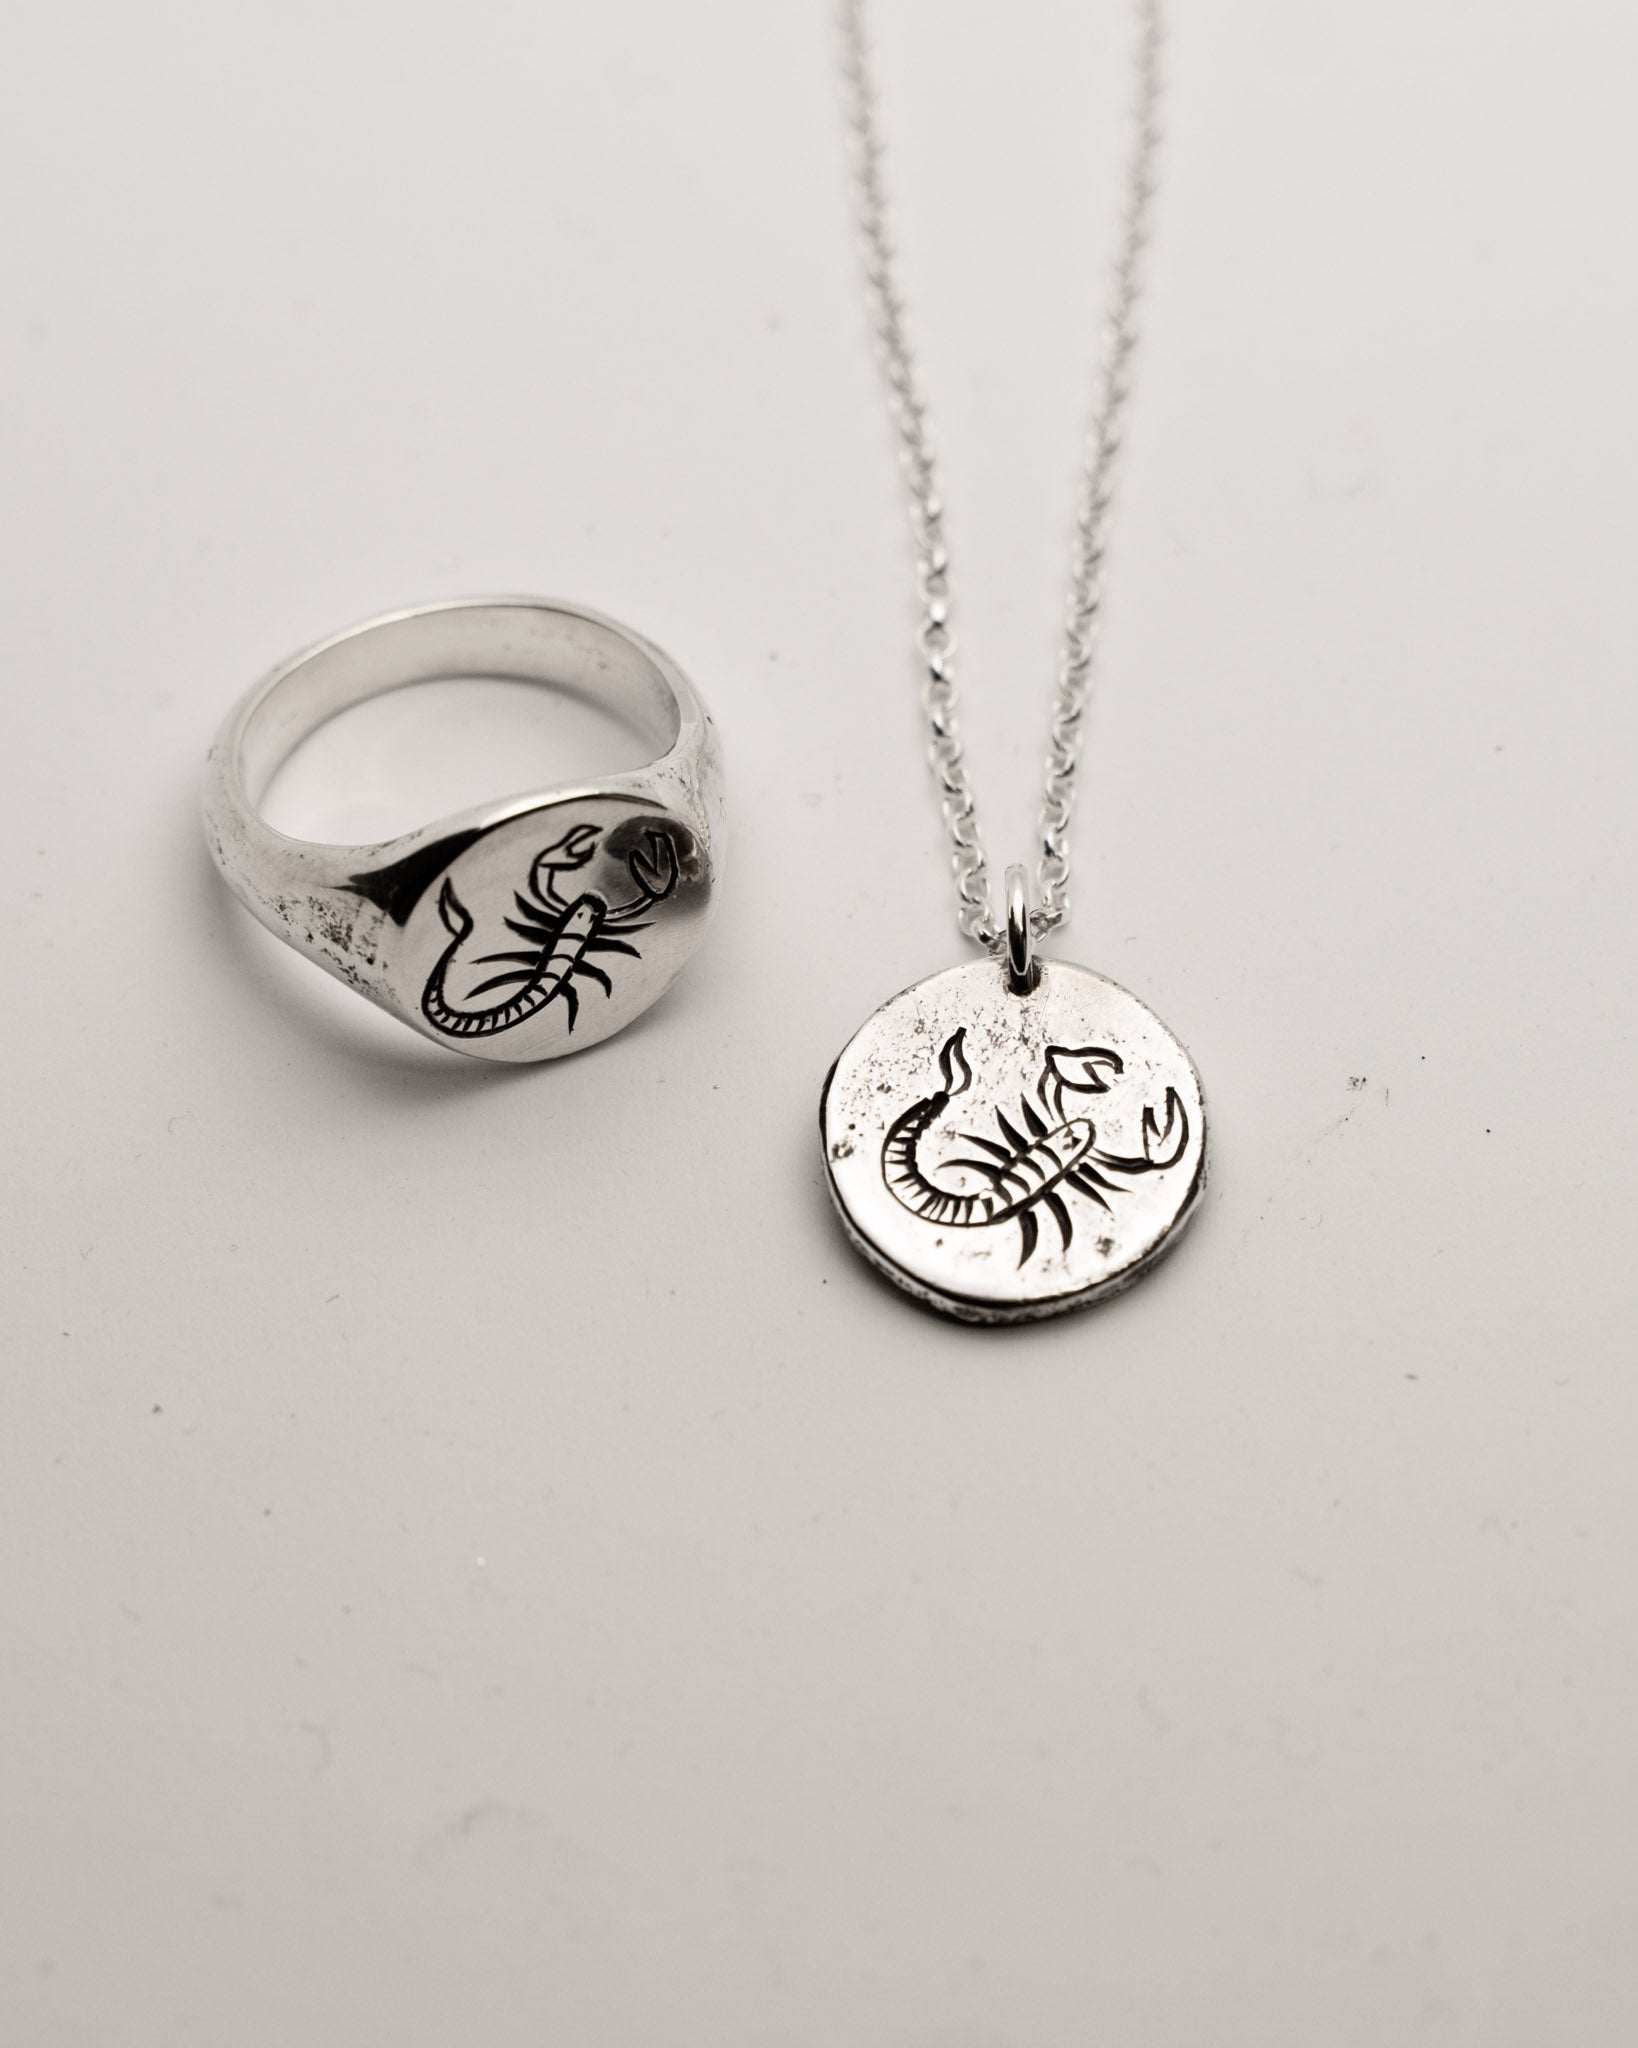 The New Scorpio Ring and Necklace